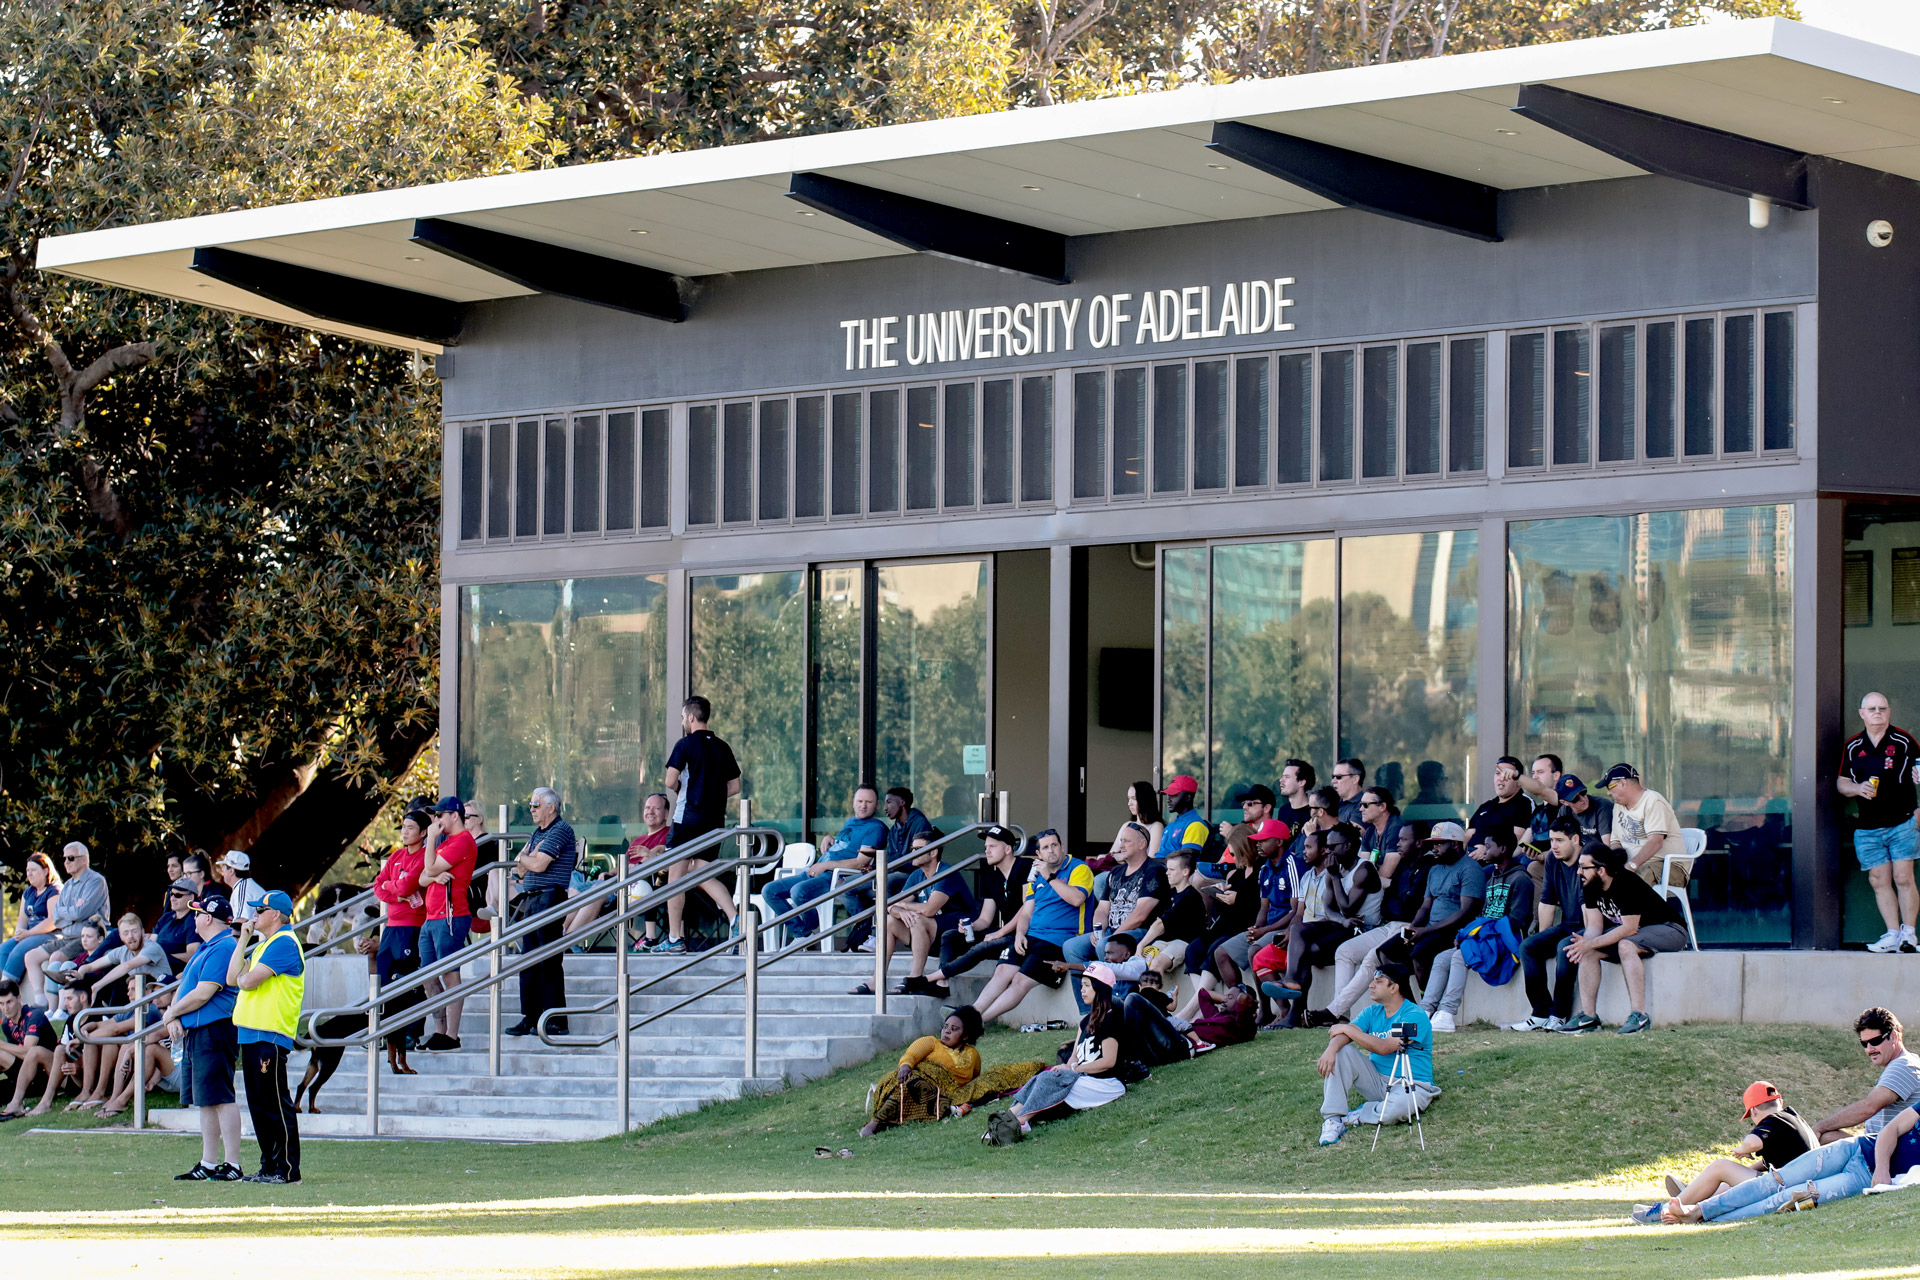 Clubhouse at State League Men home game